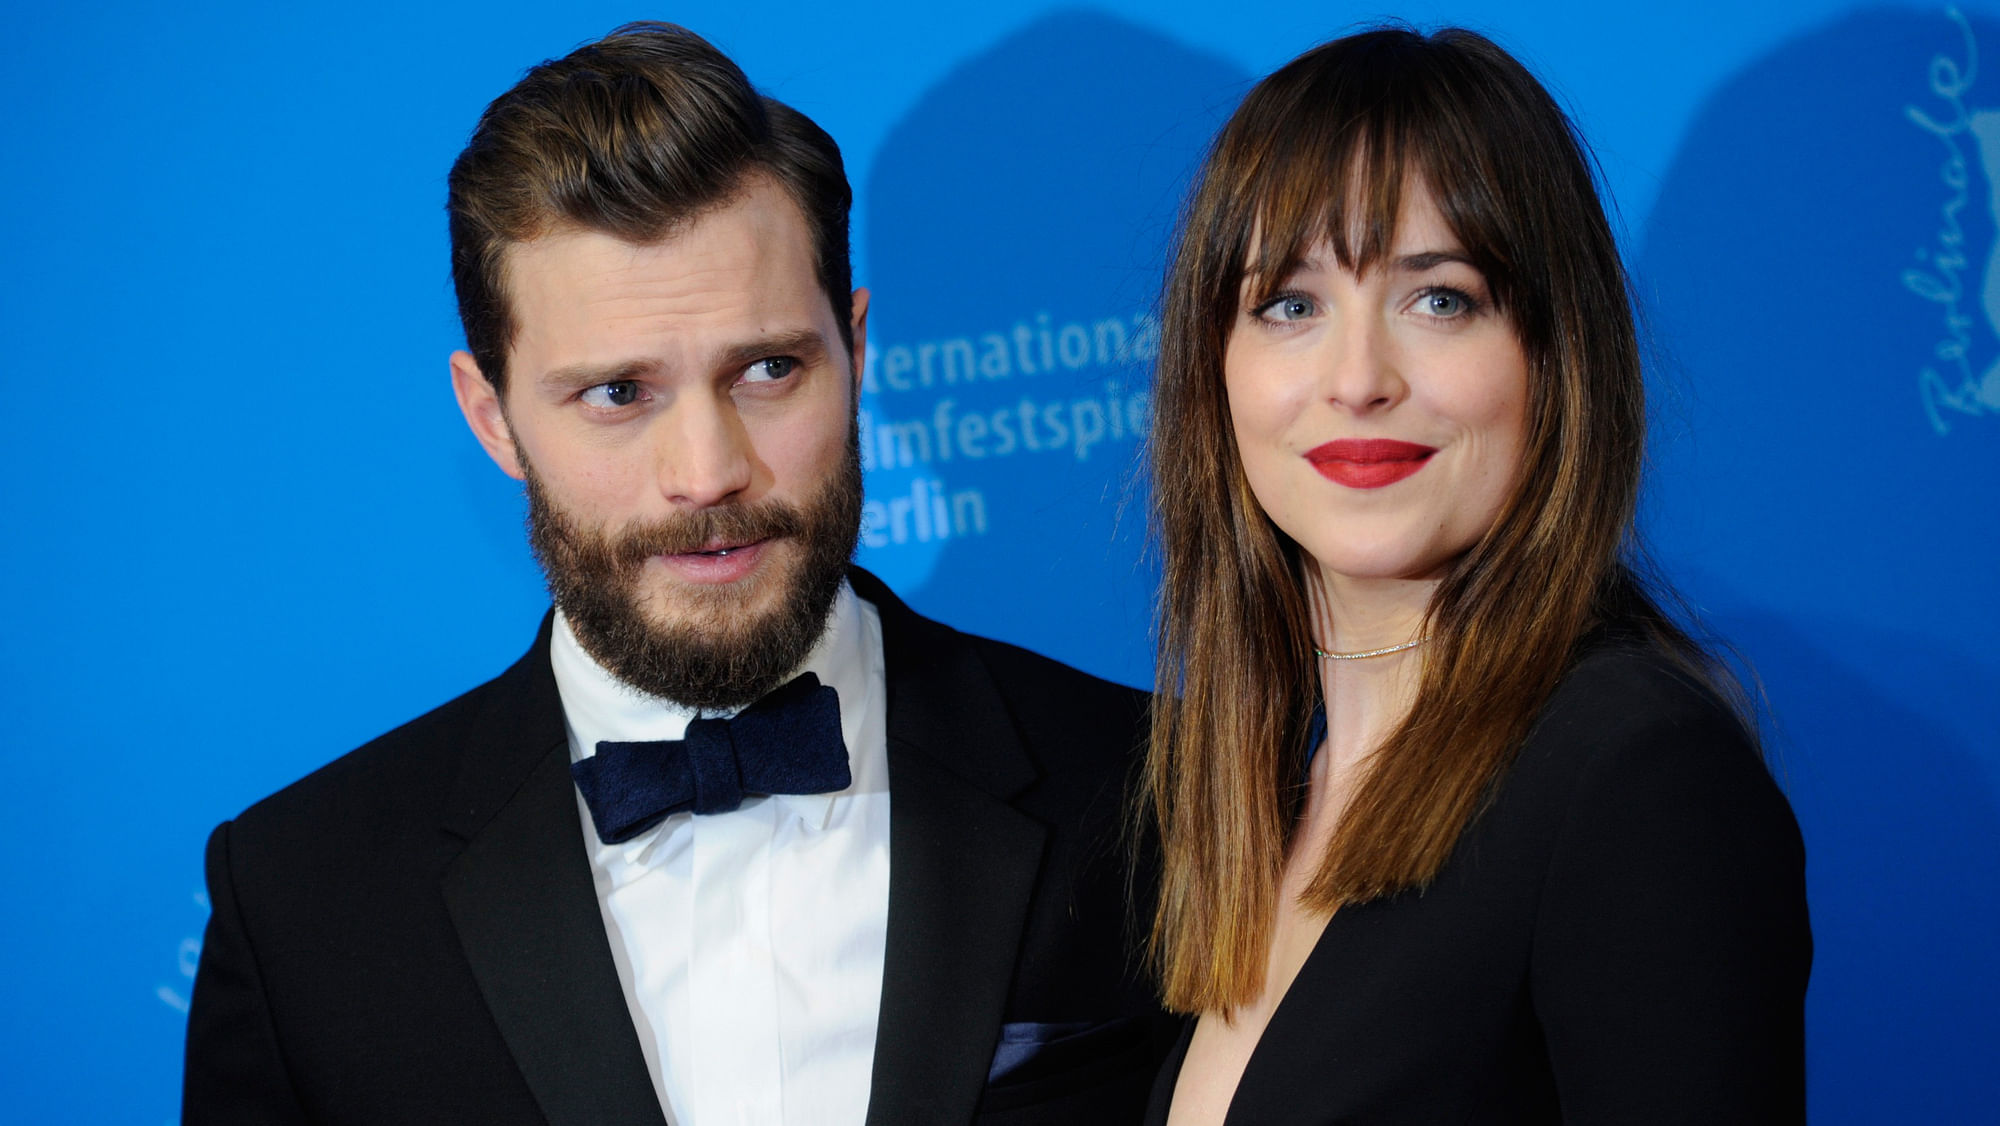 Actors Dakota Johnson and Jamie Dornan (L) arrive for the screening of the movie ‘Fifty Shades of Grey’ at the 65th Berlinale International Film Festival in Berlin. (Photo: Reuters)